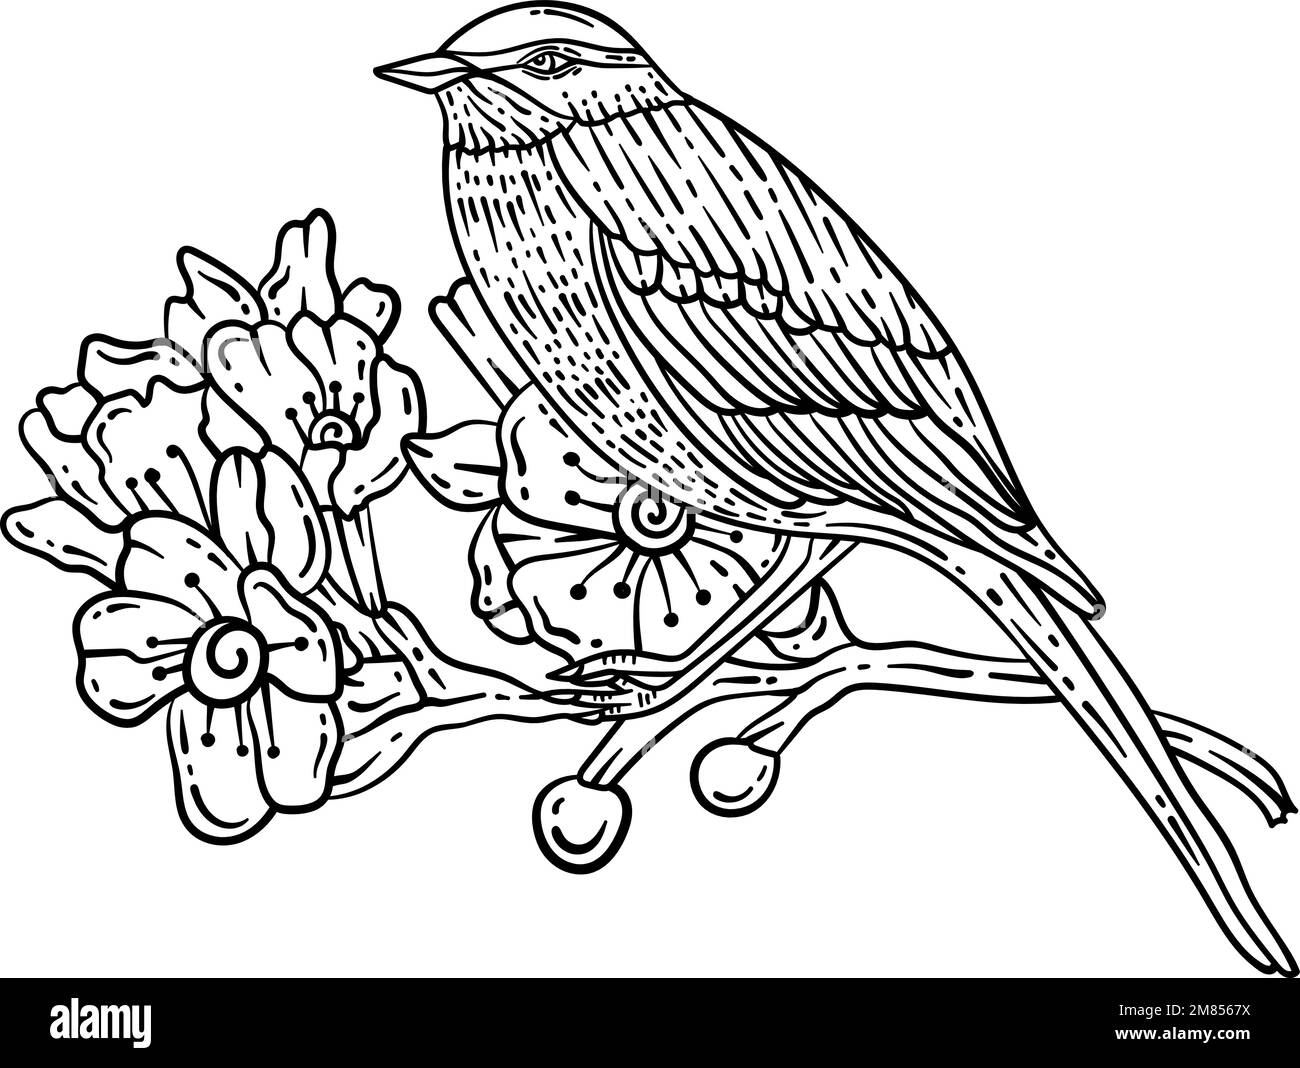 Bird Branch Spring Coloring Page for Adults Stock Vector